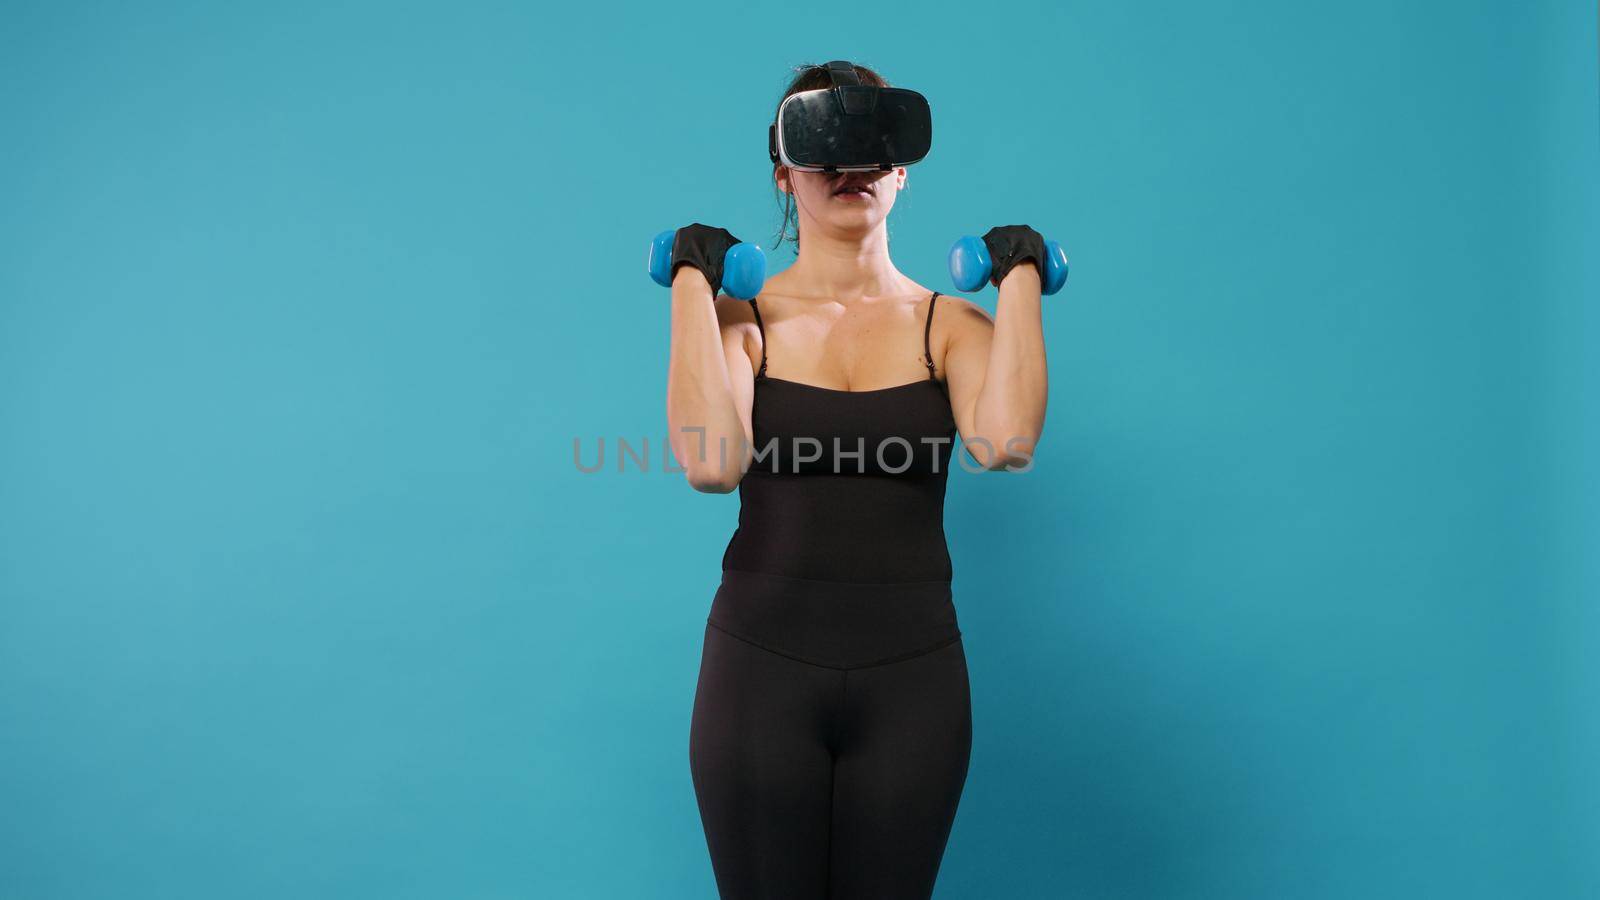 Athlete doing workout training with dumbbells and vr glasses, exercising in virtual reality. Fit woman wearing virtual reality headset to do fitness activity and train muscles with weights lifting